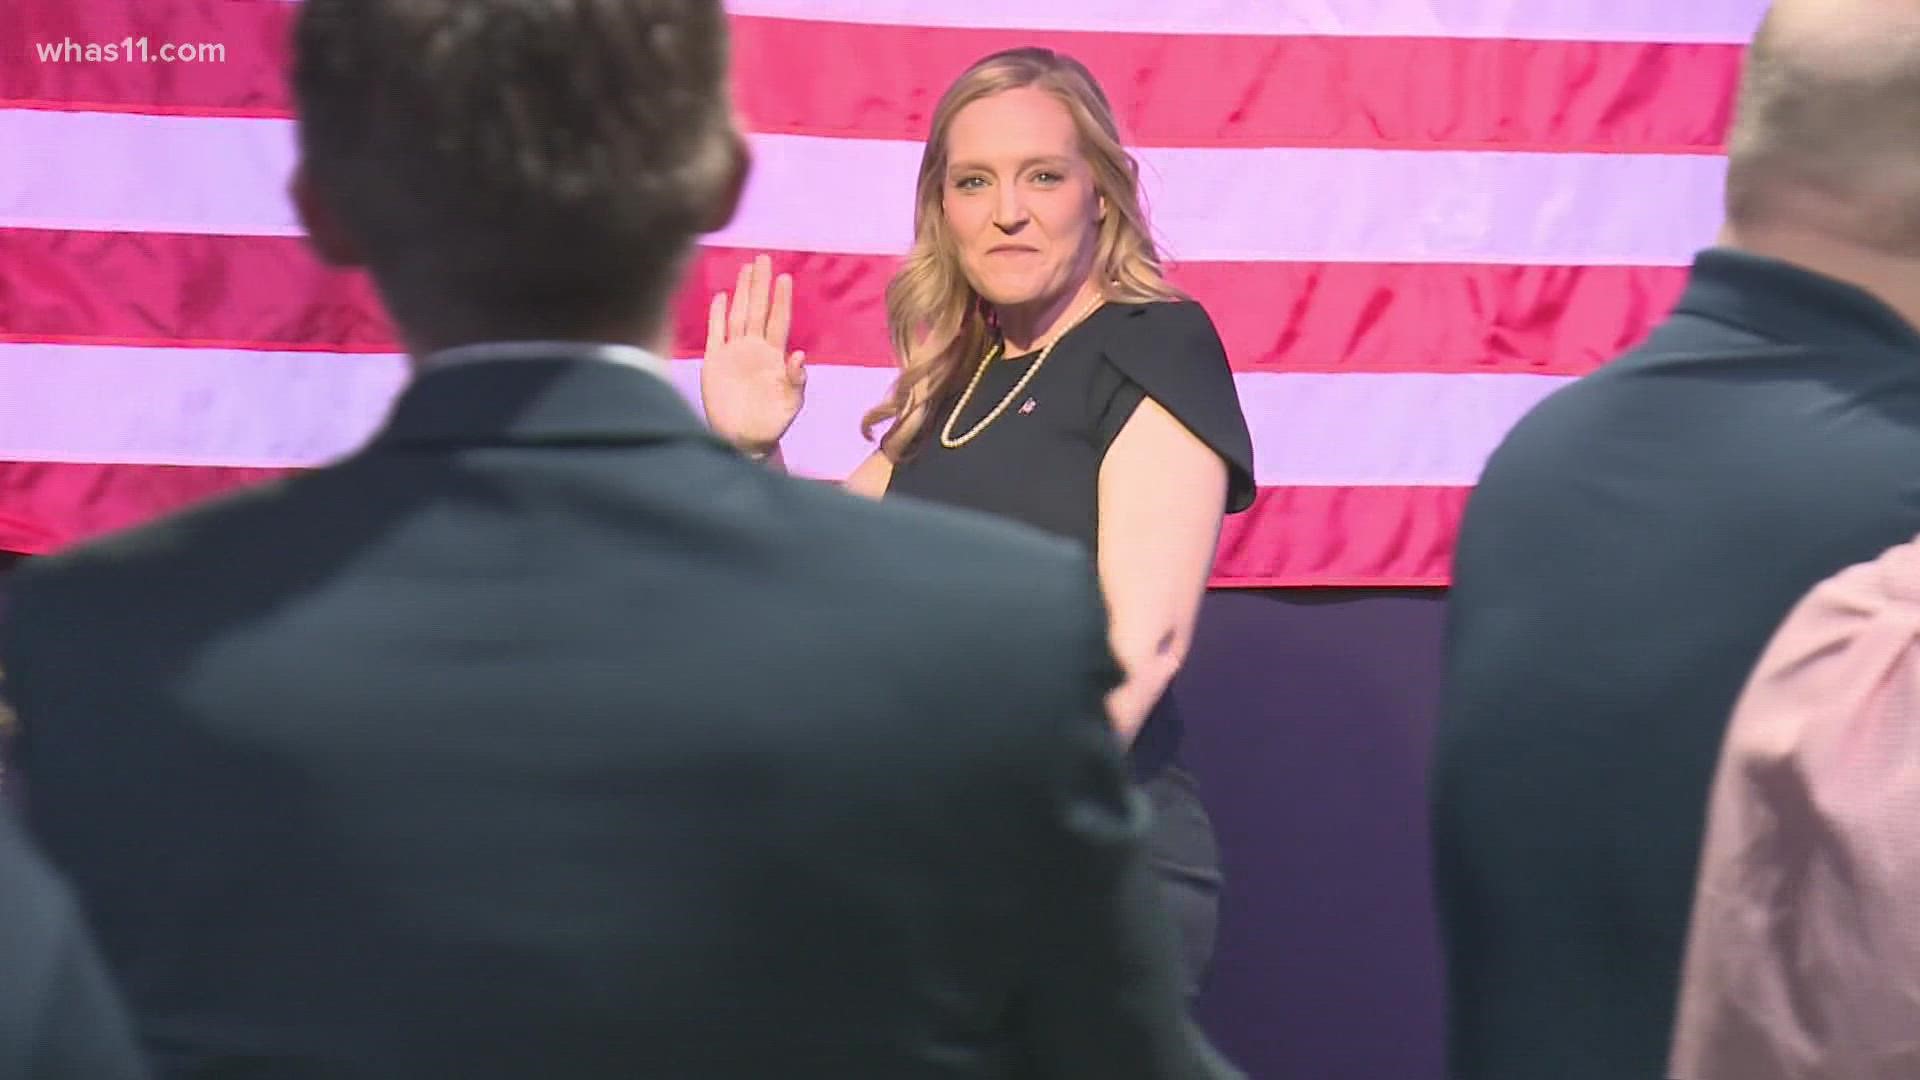 Erin Houchin defeated a crowded field to win the Republican nomination. She received 37% of the vote.